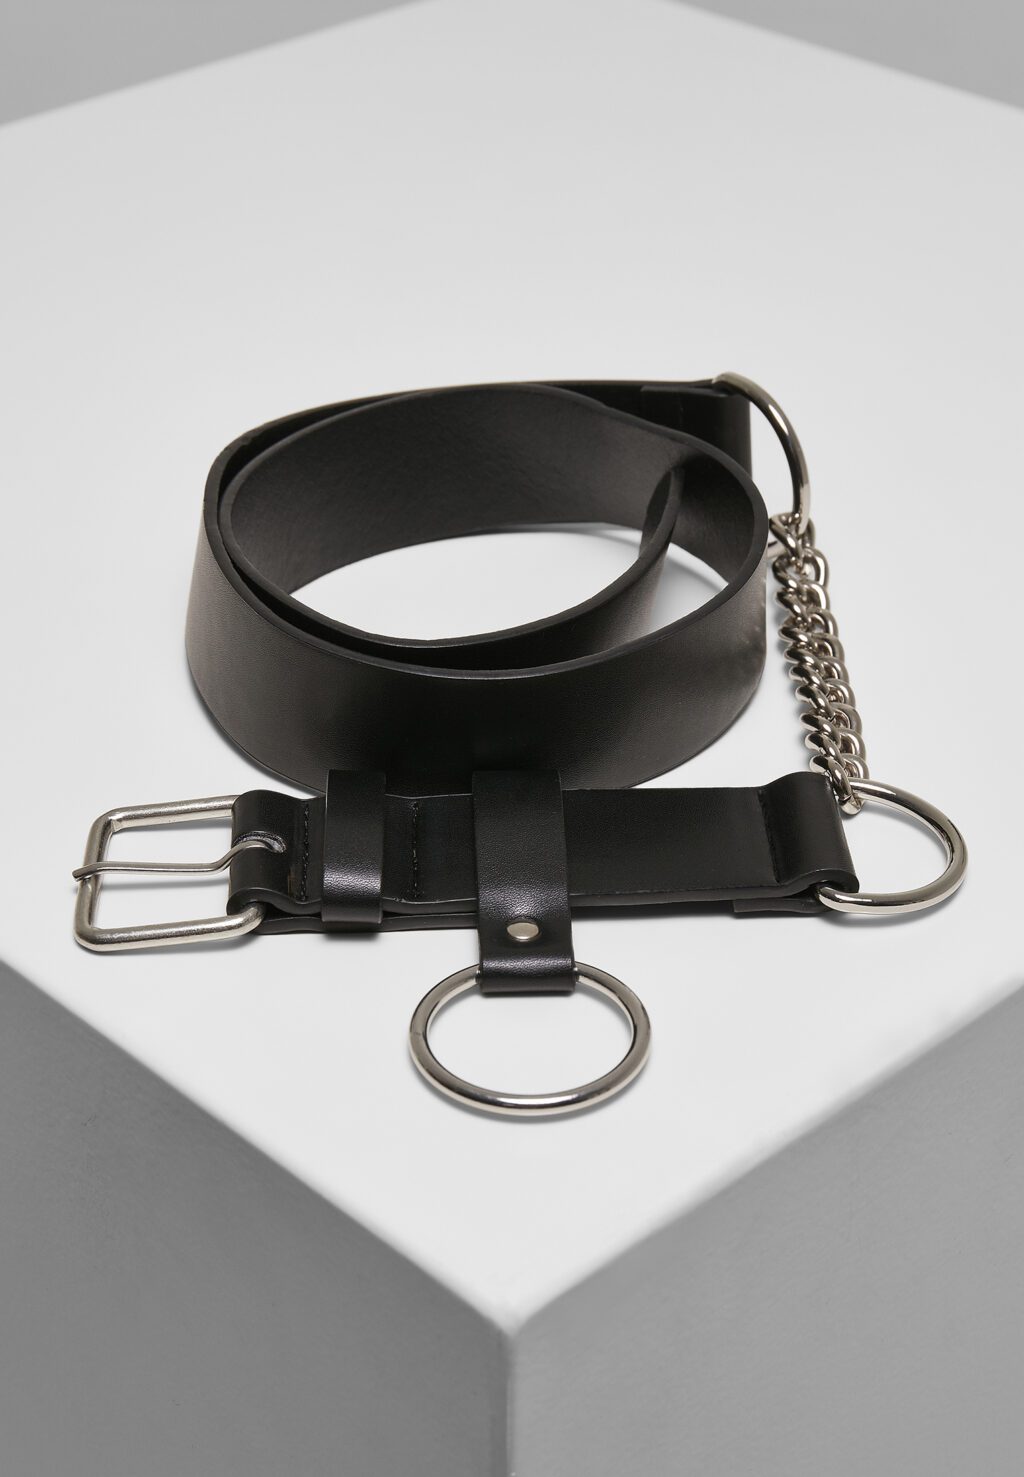 Chain Synthetic Leather Belt black/silver TB4183